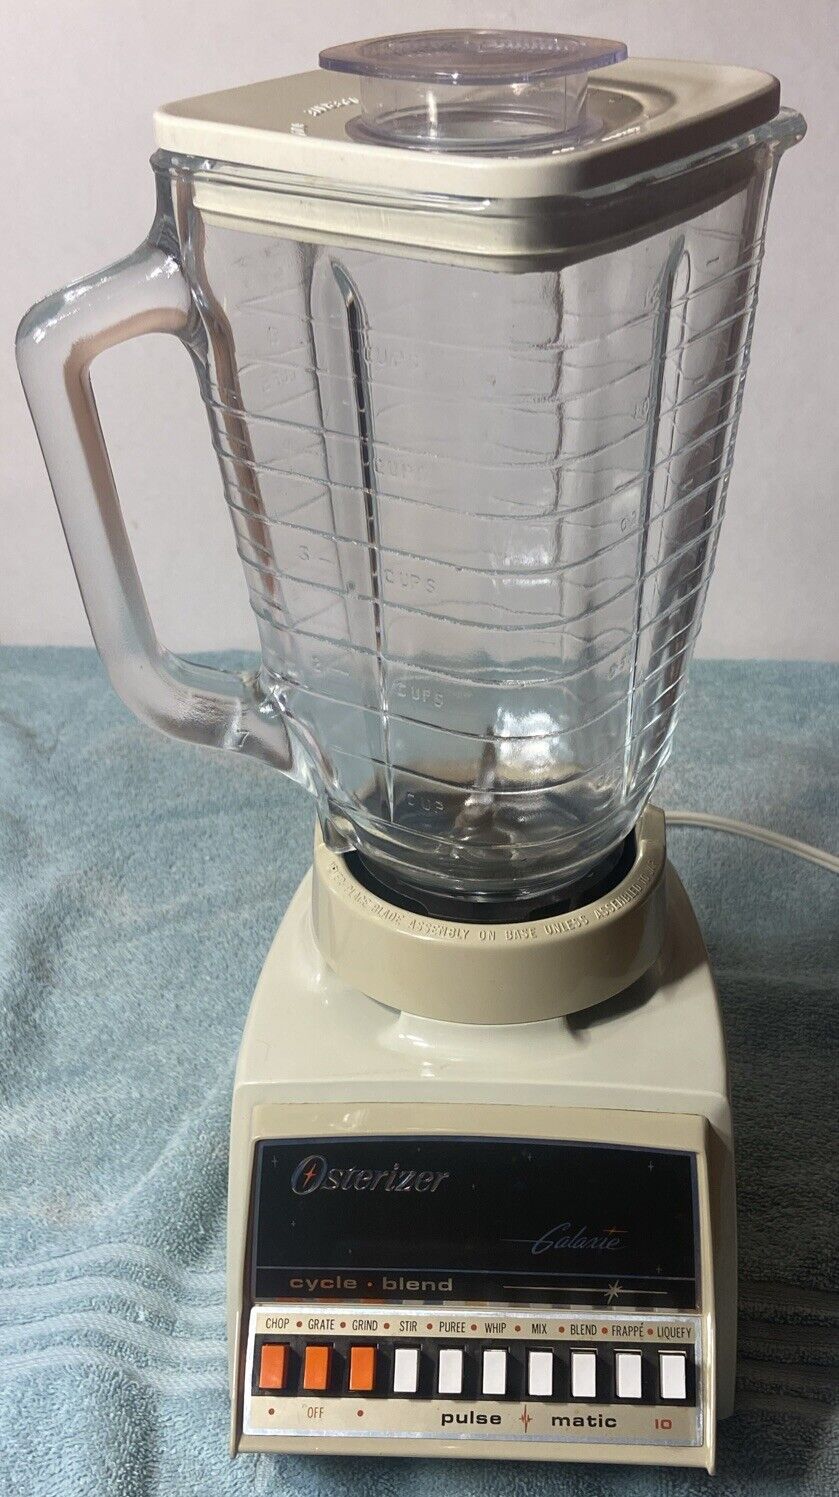 VINTAGE  OSTERIZER 10-SPEED GALAXY BLENDER MIXER TAN COLOR GLASS PITCHER WORKS.